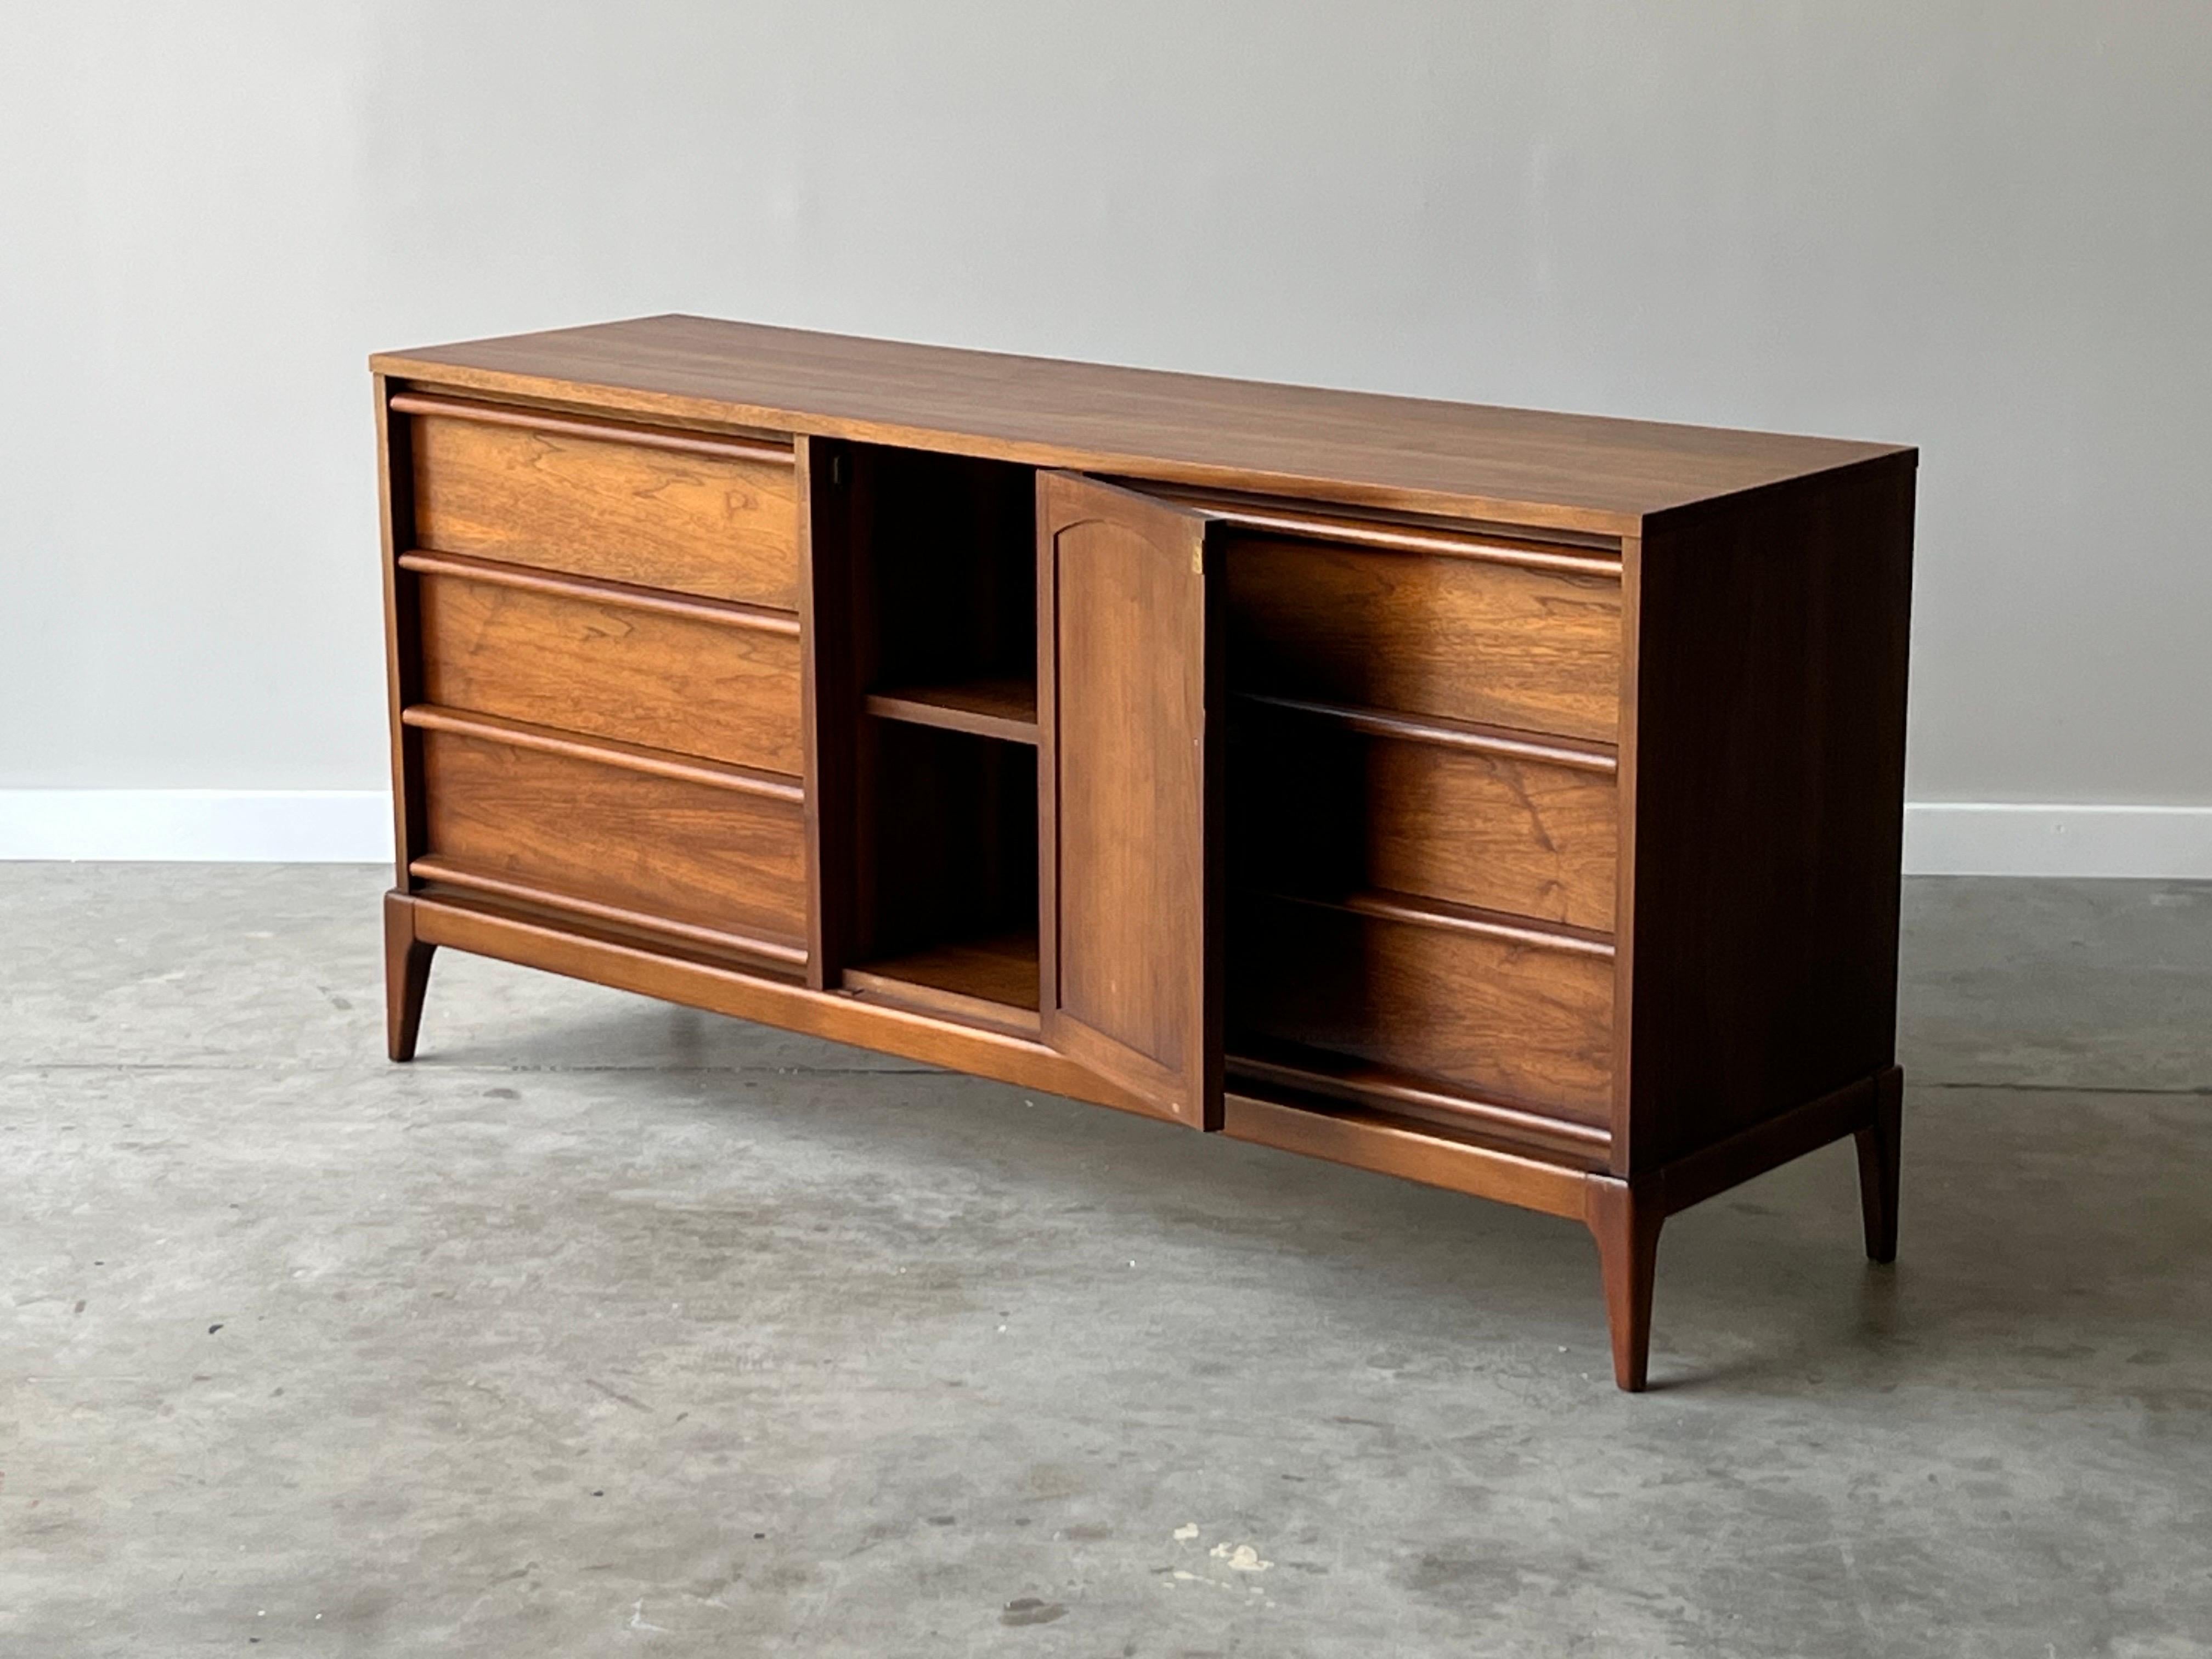 Beautiful mid century lane rhythm dresser with smooth sliding drawers and middle compartment. Very minimal patina appropriate with age. Top has been refinished. Middle compartment adds more storage and could work well as a media console.

Dimensions